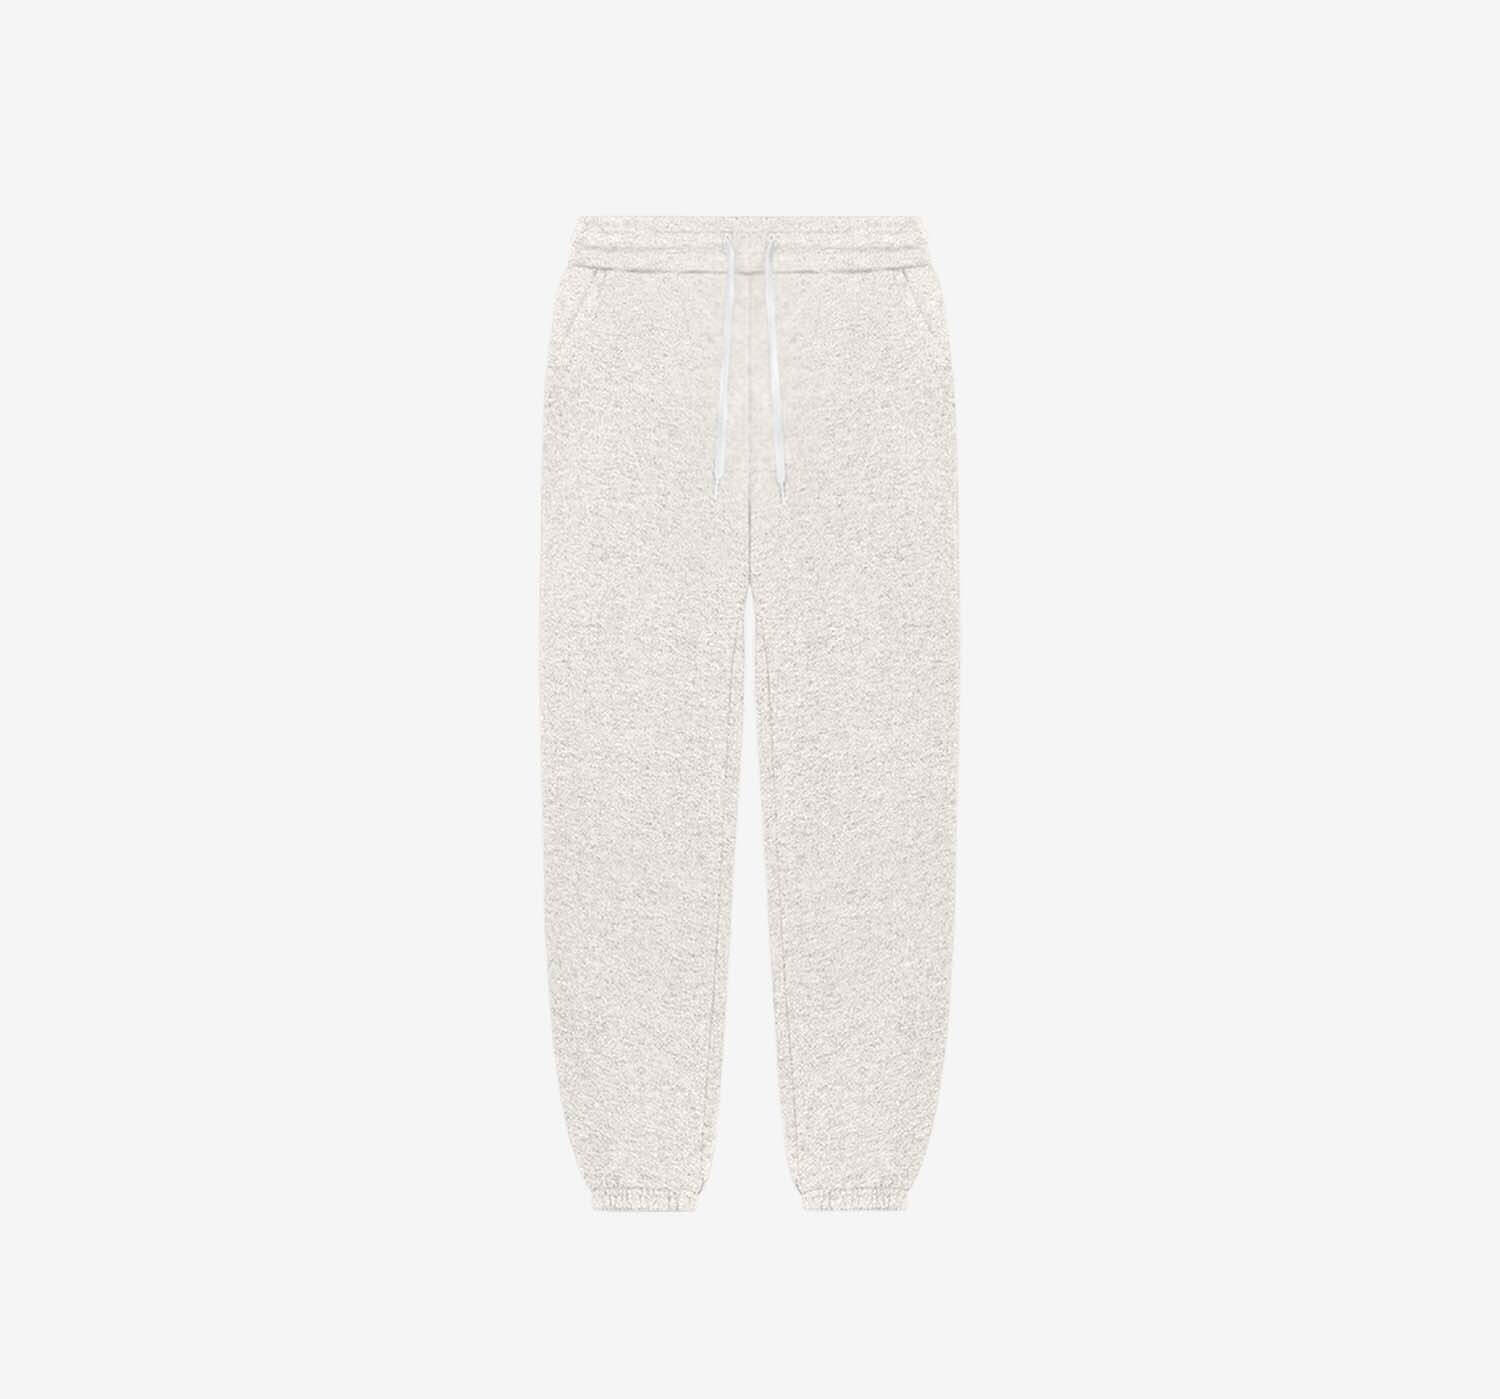 Studio Sweatpant | Oatmeal Heather - Oliver Cabell